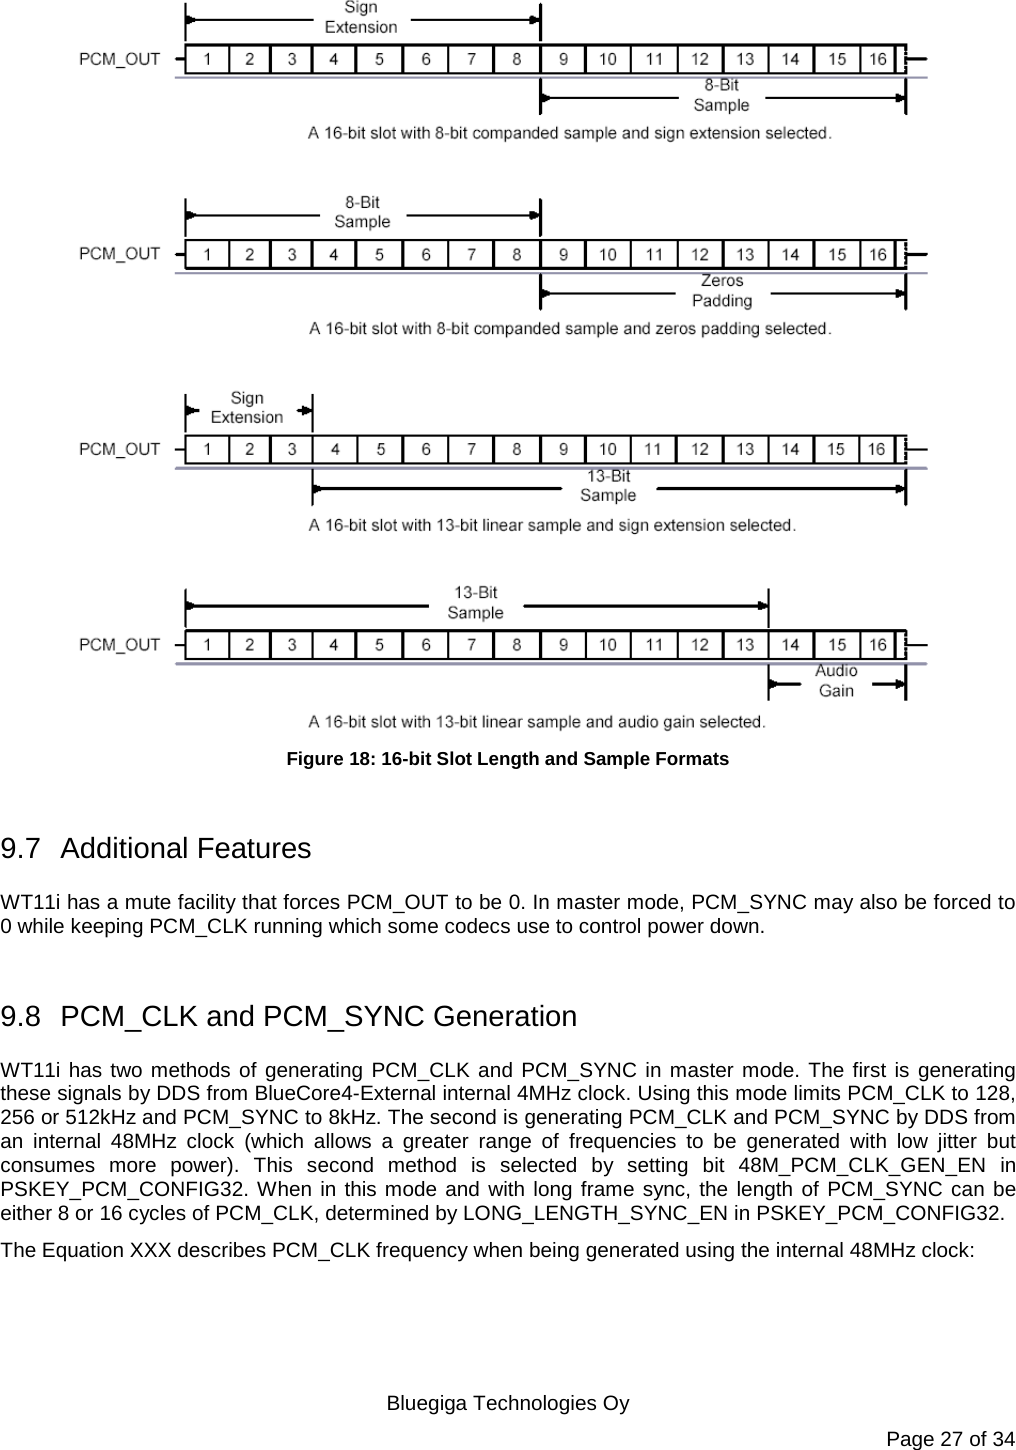   Bluegiga Technologies Oy Page 27 of 34  Figure 18: 16-bit Slot Length and Sample Formats  9.7 Additional Features WT11i has a mute facility that forces PCM_OUT to be 0. In master mode, PCM_SYNC may also be forced to 0 while keeping PCM_CLK running which some codecs use to control power down.  9.8 PCM_CLK and PCM_SYNC Generation WT11i has two methods of generating PCM_CLK and PCM_SYNC in master mode. The first is generating these signals by DDS from BlueCore4-External internal 4MHz clock. Using this mode limits PCM_CLK to 128, 256 or 512kHz and PCM_SYNC to 8kHz. The second is generating PCM_CLK and PCM_SYNC by DDS from an internal 48MHz clock (which allows a greater range of frequencies to be generated with low jitter but consumes more power). This second method is selected by setting bit 48M_PCM_CLK_GEN_EN in PSKEY_PCM_CONFIG32. When in this mode and with long frame sync, the length of PCM_SYNC can be either 8 or 16 cycles of PCM_CLK, determined by LONG_LENGTH_SYNC_EN in PSKEY_PCM_CONFIG32. The Equation XXX describes PCM_CLK frequency when being generated using the internal 48MHz clock:  